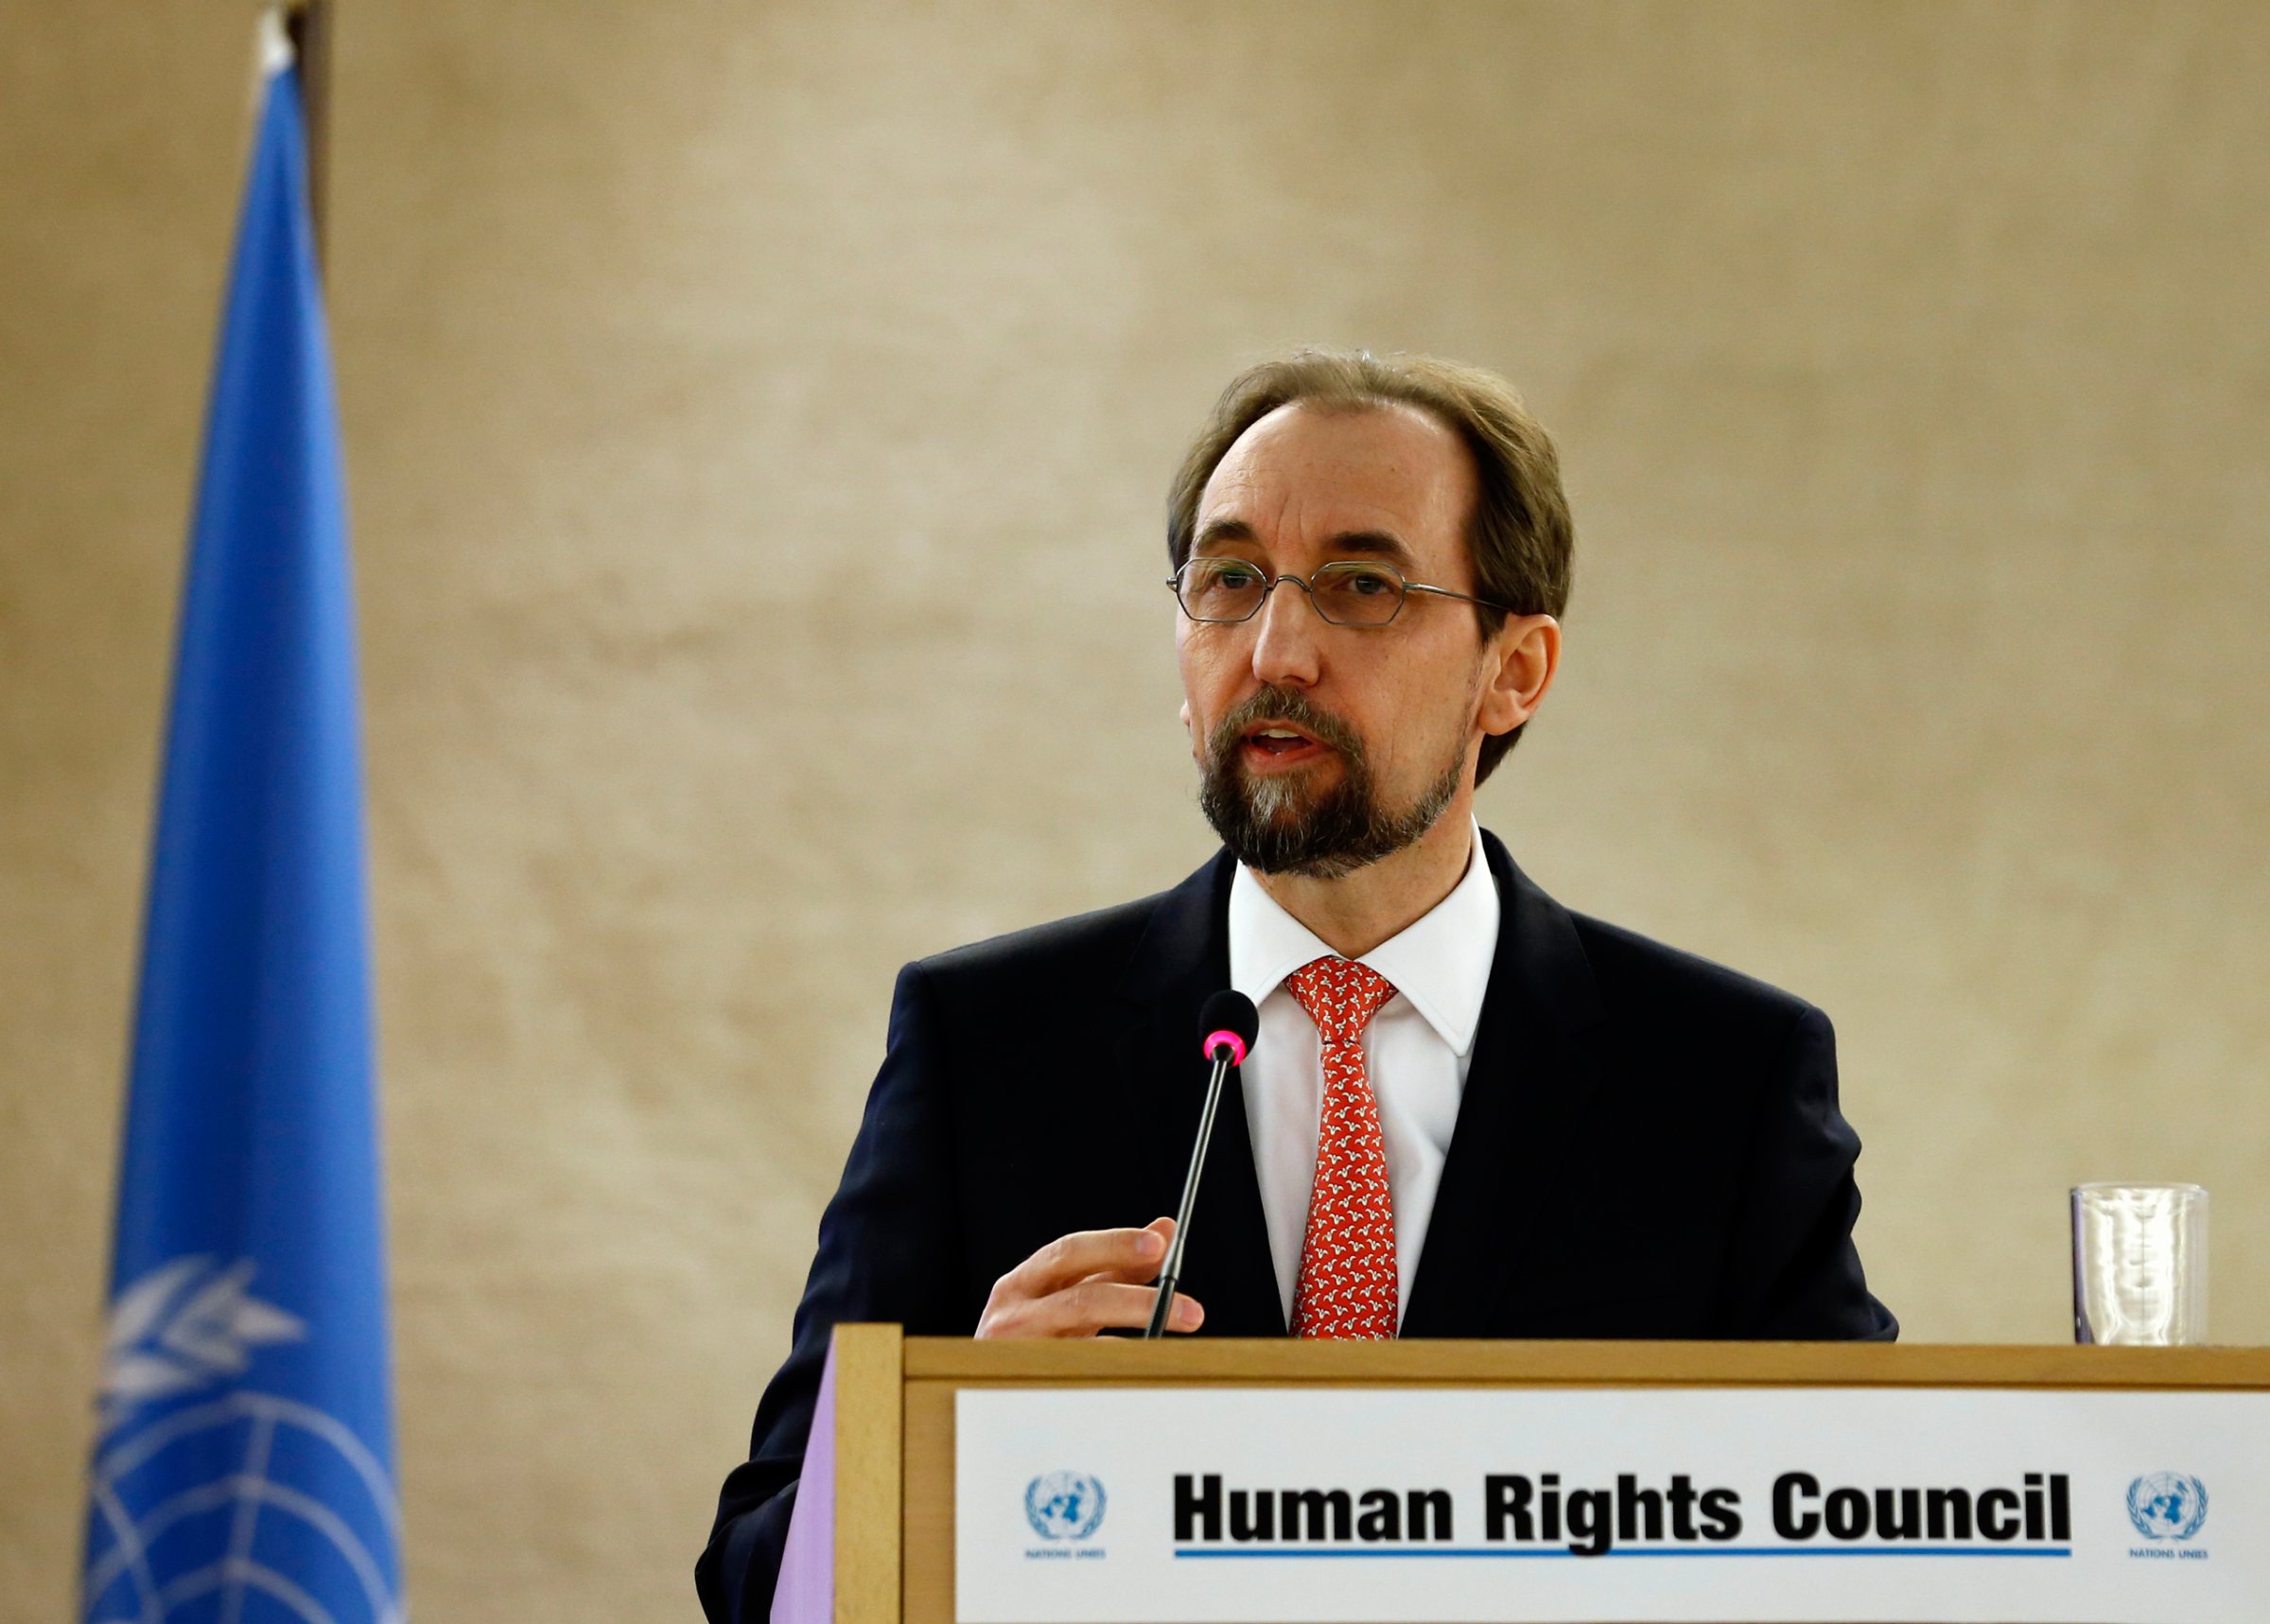 United Nations (U.N.) High Commissioner for Human Rights Zeid Ra'ad Al Hussein addresses the 31st session of the Human Rights Council at the U.N. European headquarters in Geneva, Switzerland, February 29, 2016. REUTERS/Denis Balibouse - RTS8J0V